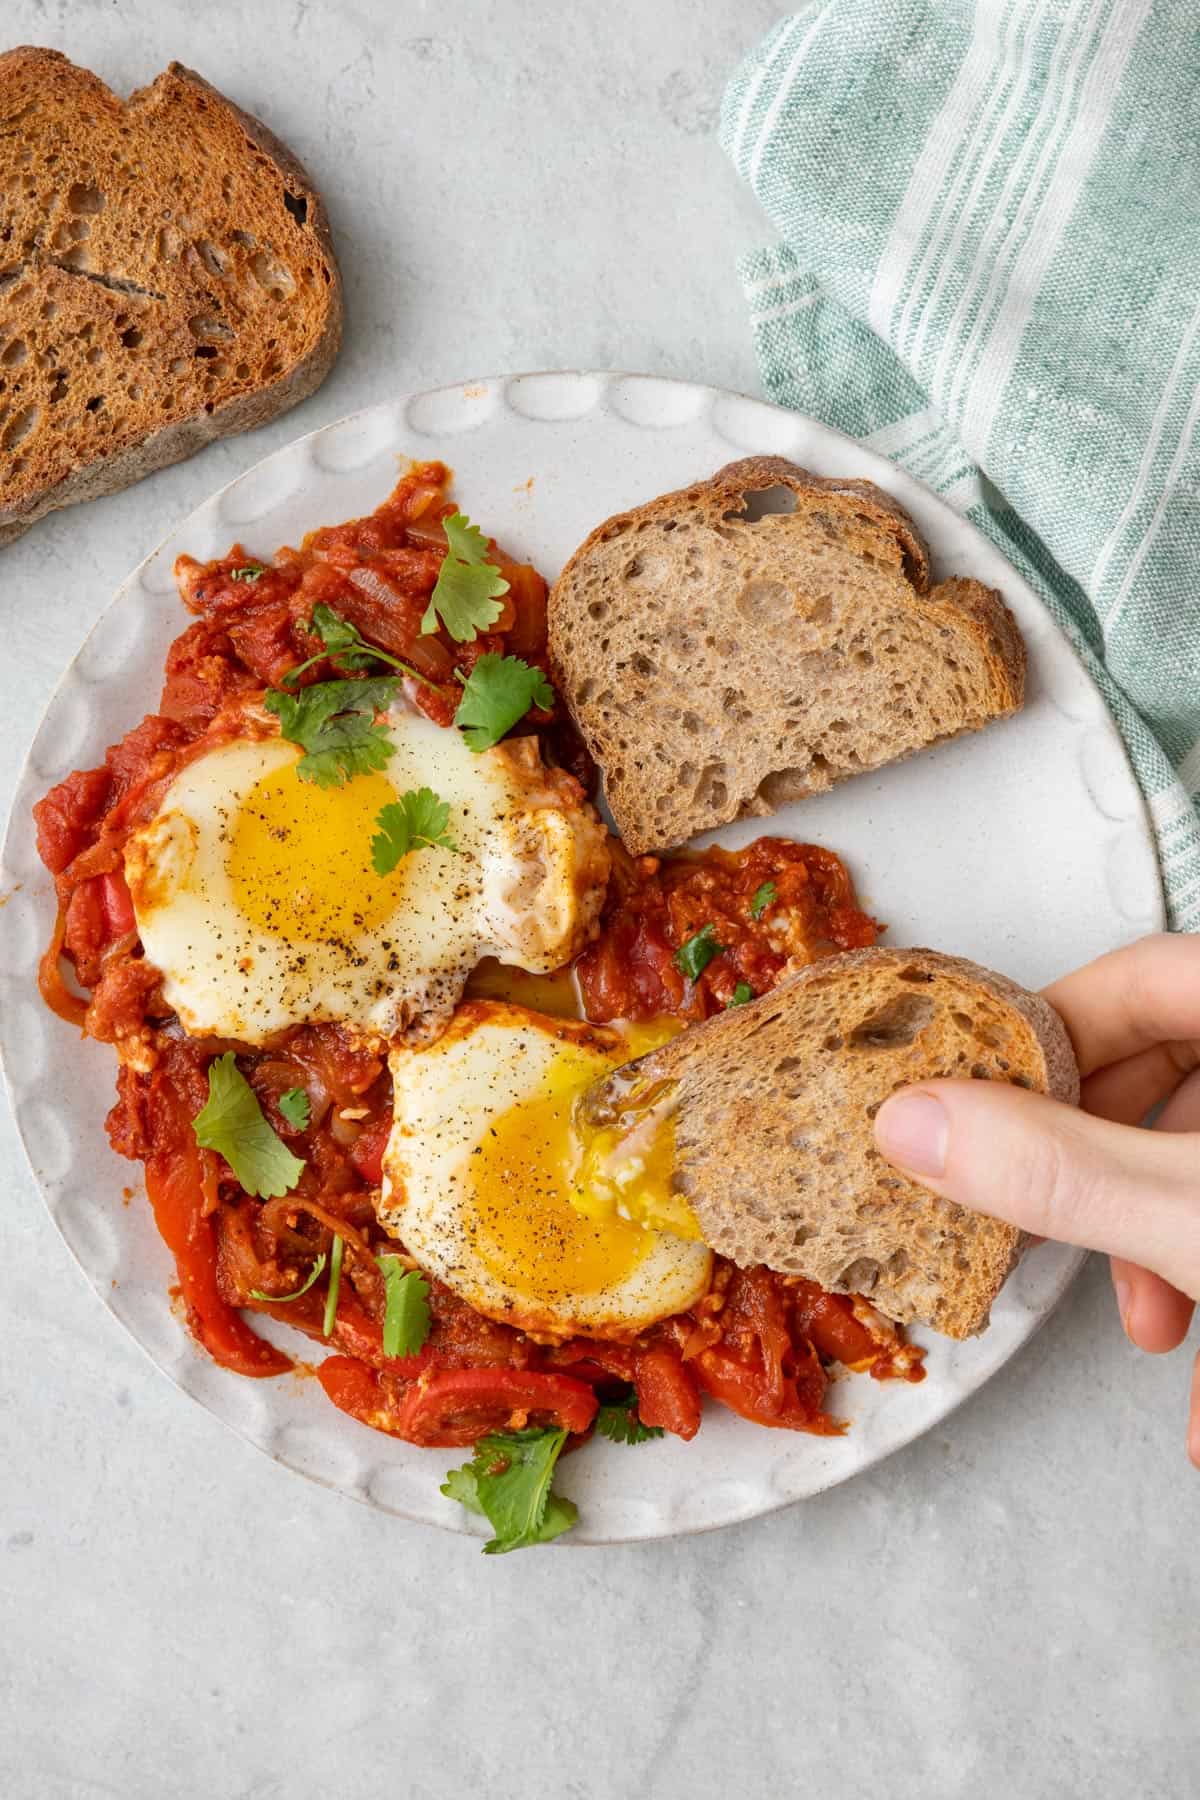 Two eggs served over shakshuka filling on a plate with a piece of toasted sourdough artisan bread dipping into the jammy egg yolk.